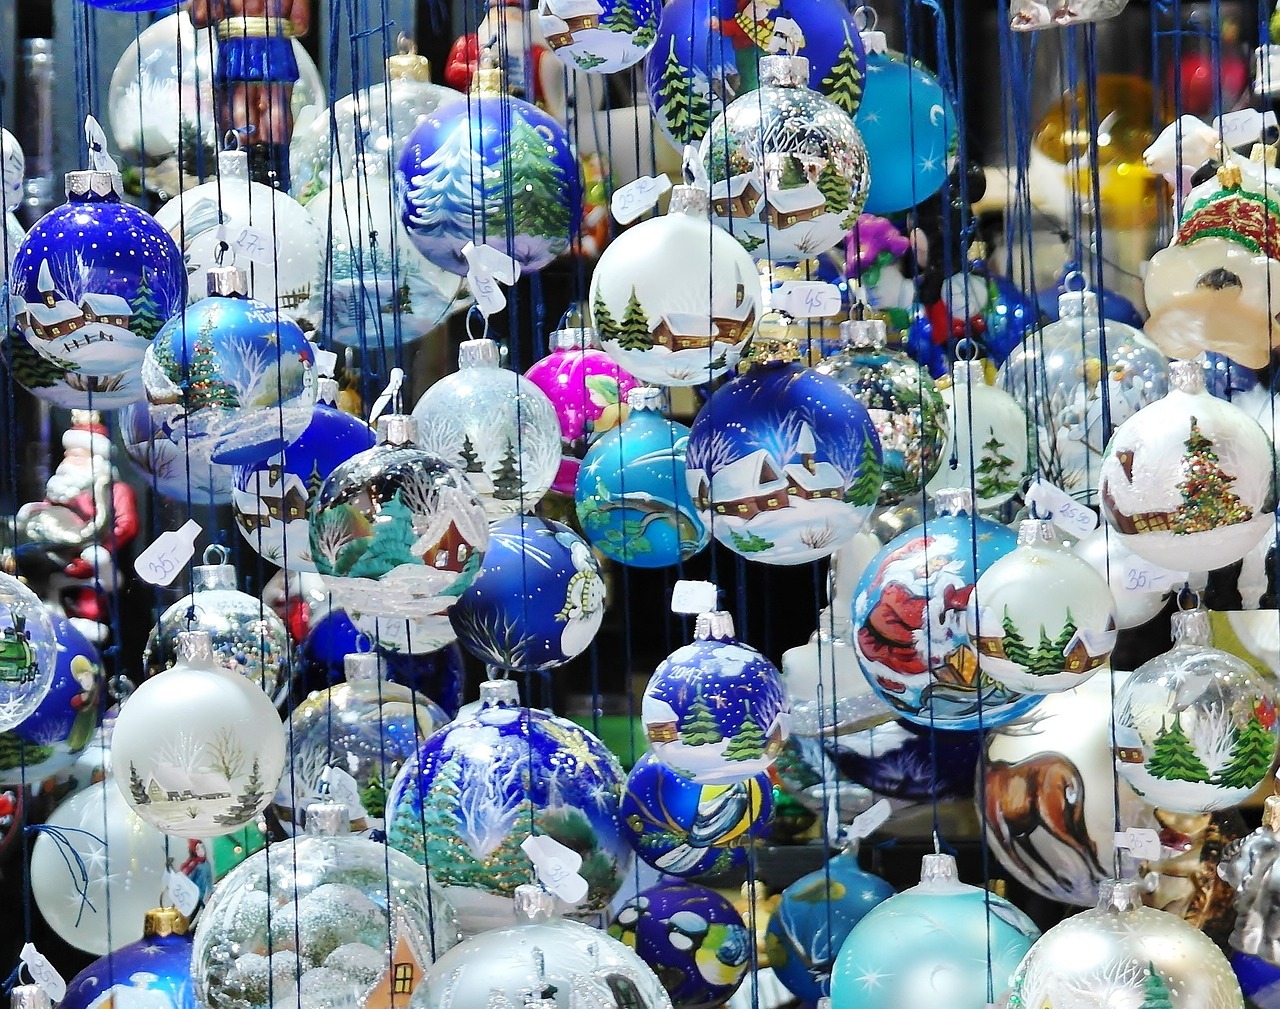 a bunch of christmas ornaments hanging from strings, a photo, inspired by Ludwig Knaus, flickr, cloisonnism, paint-on-glass painting, tourist photo, blue! and white colors, the vibrant echoes of the market